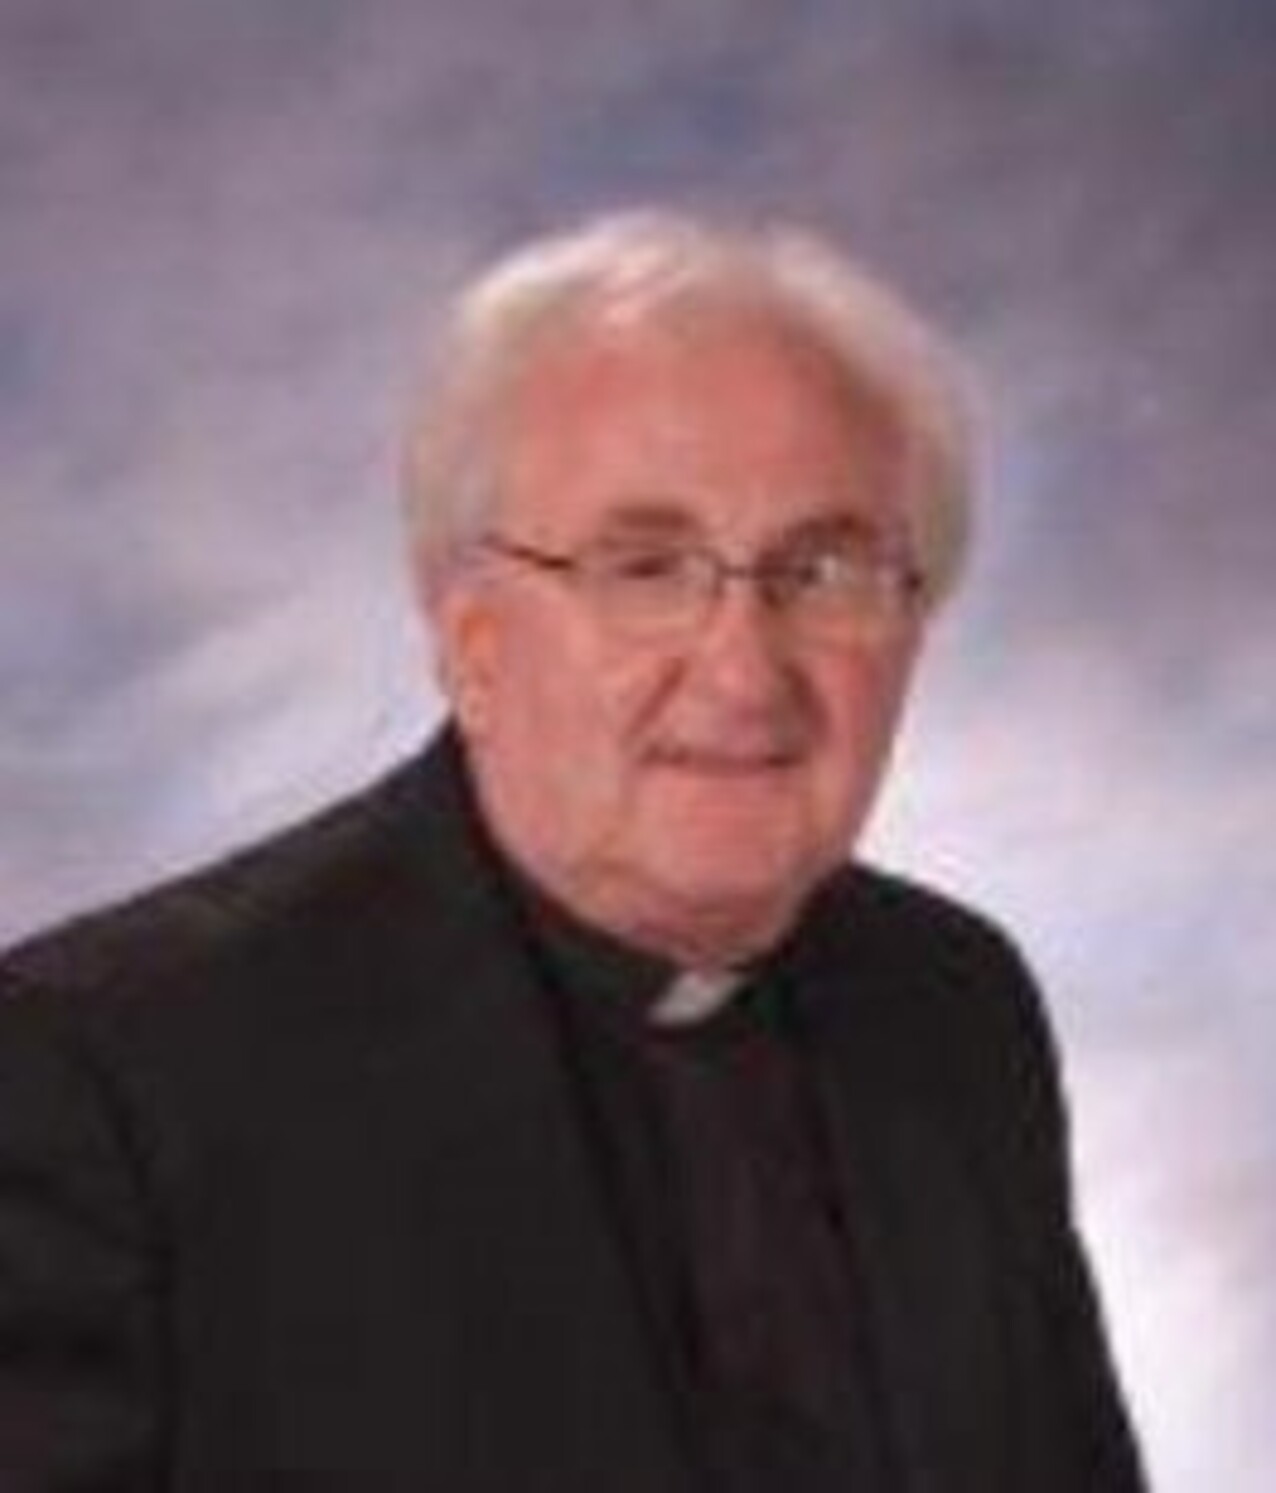 In remembrance – Father Donald B. Cozzens